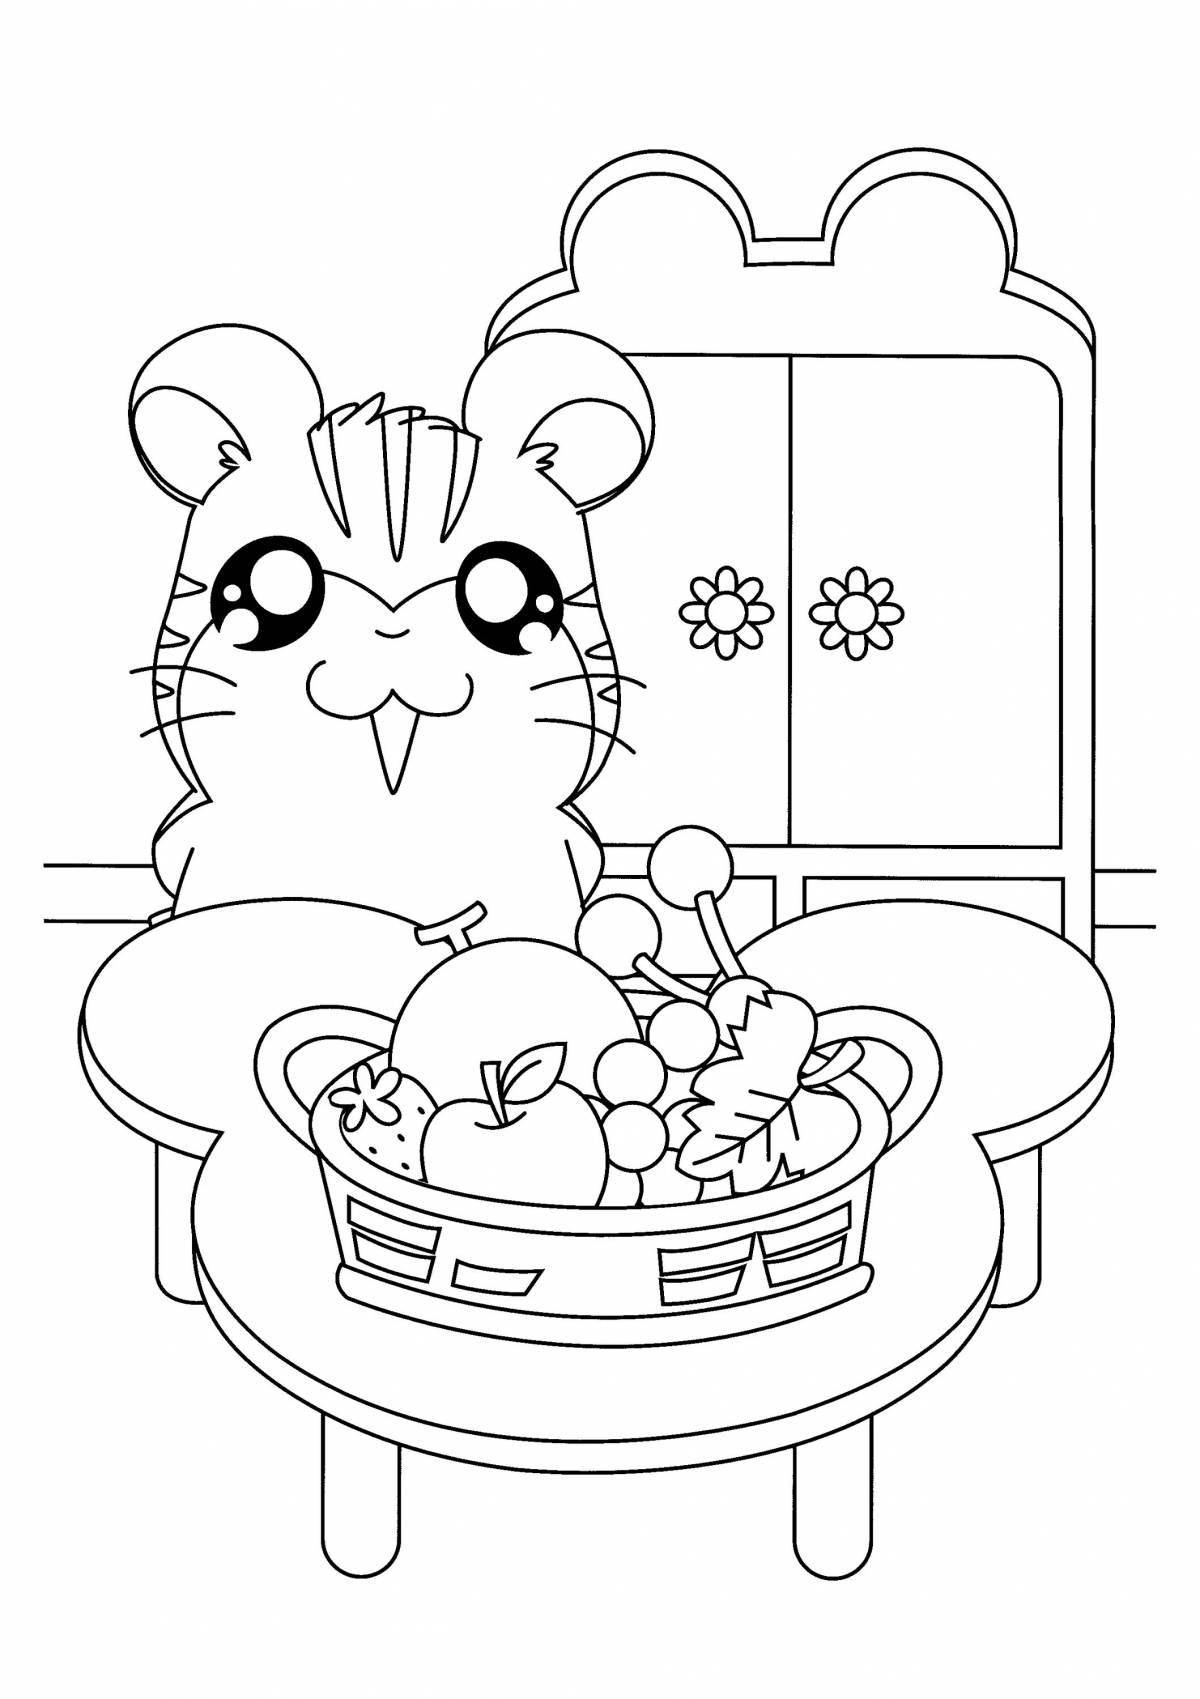 Colorful coloring pages with hamsters